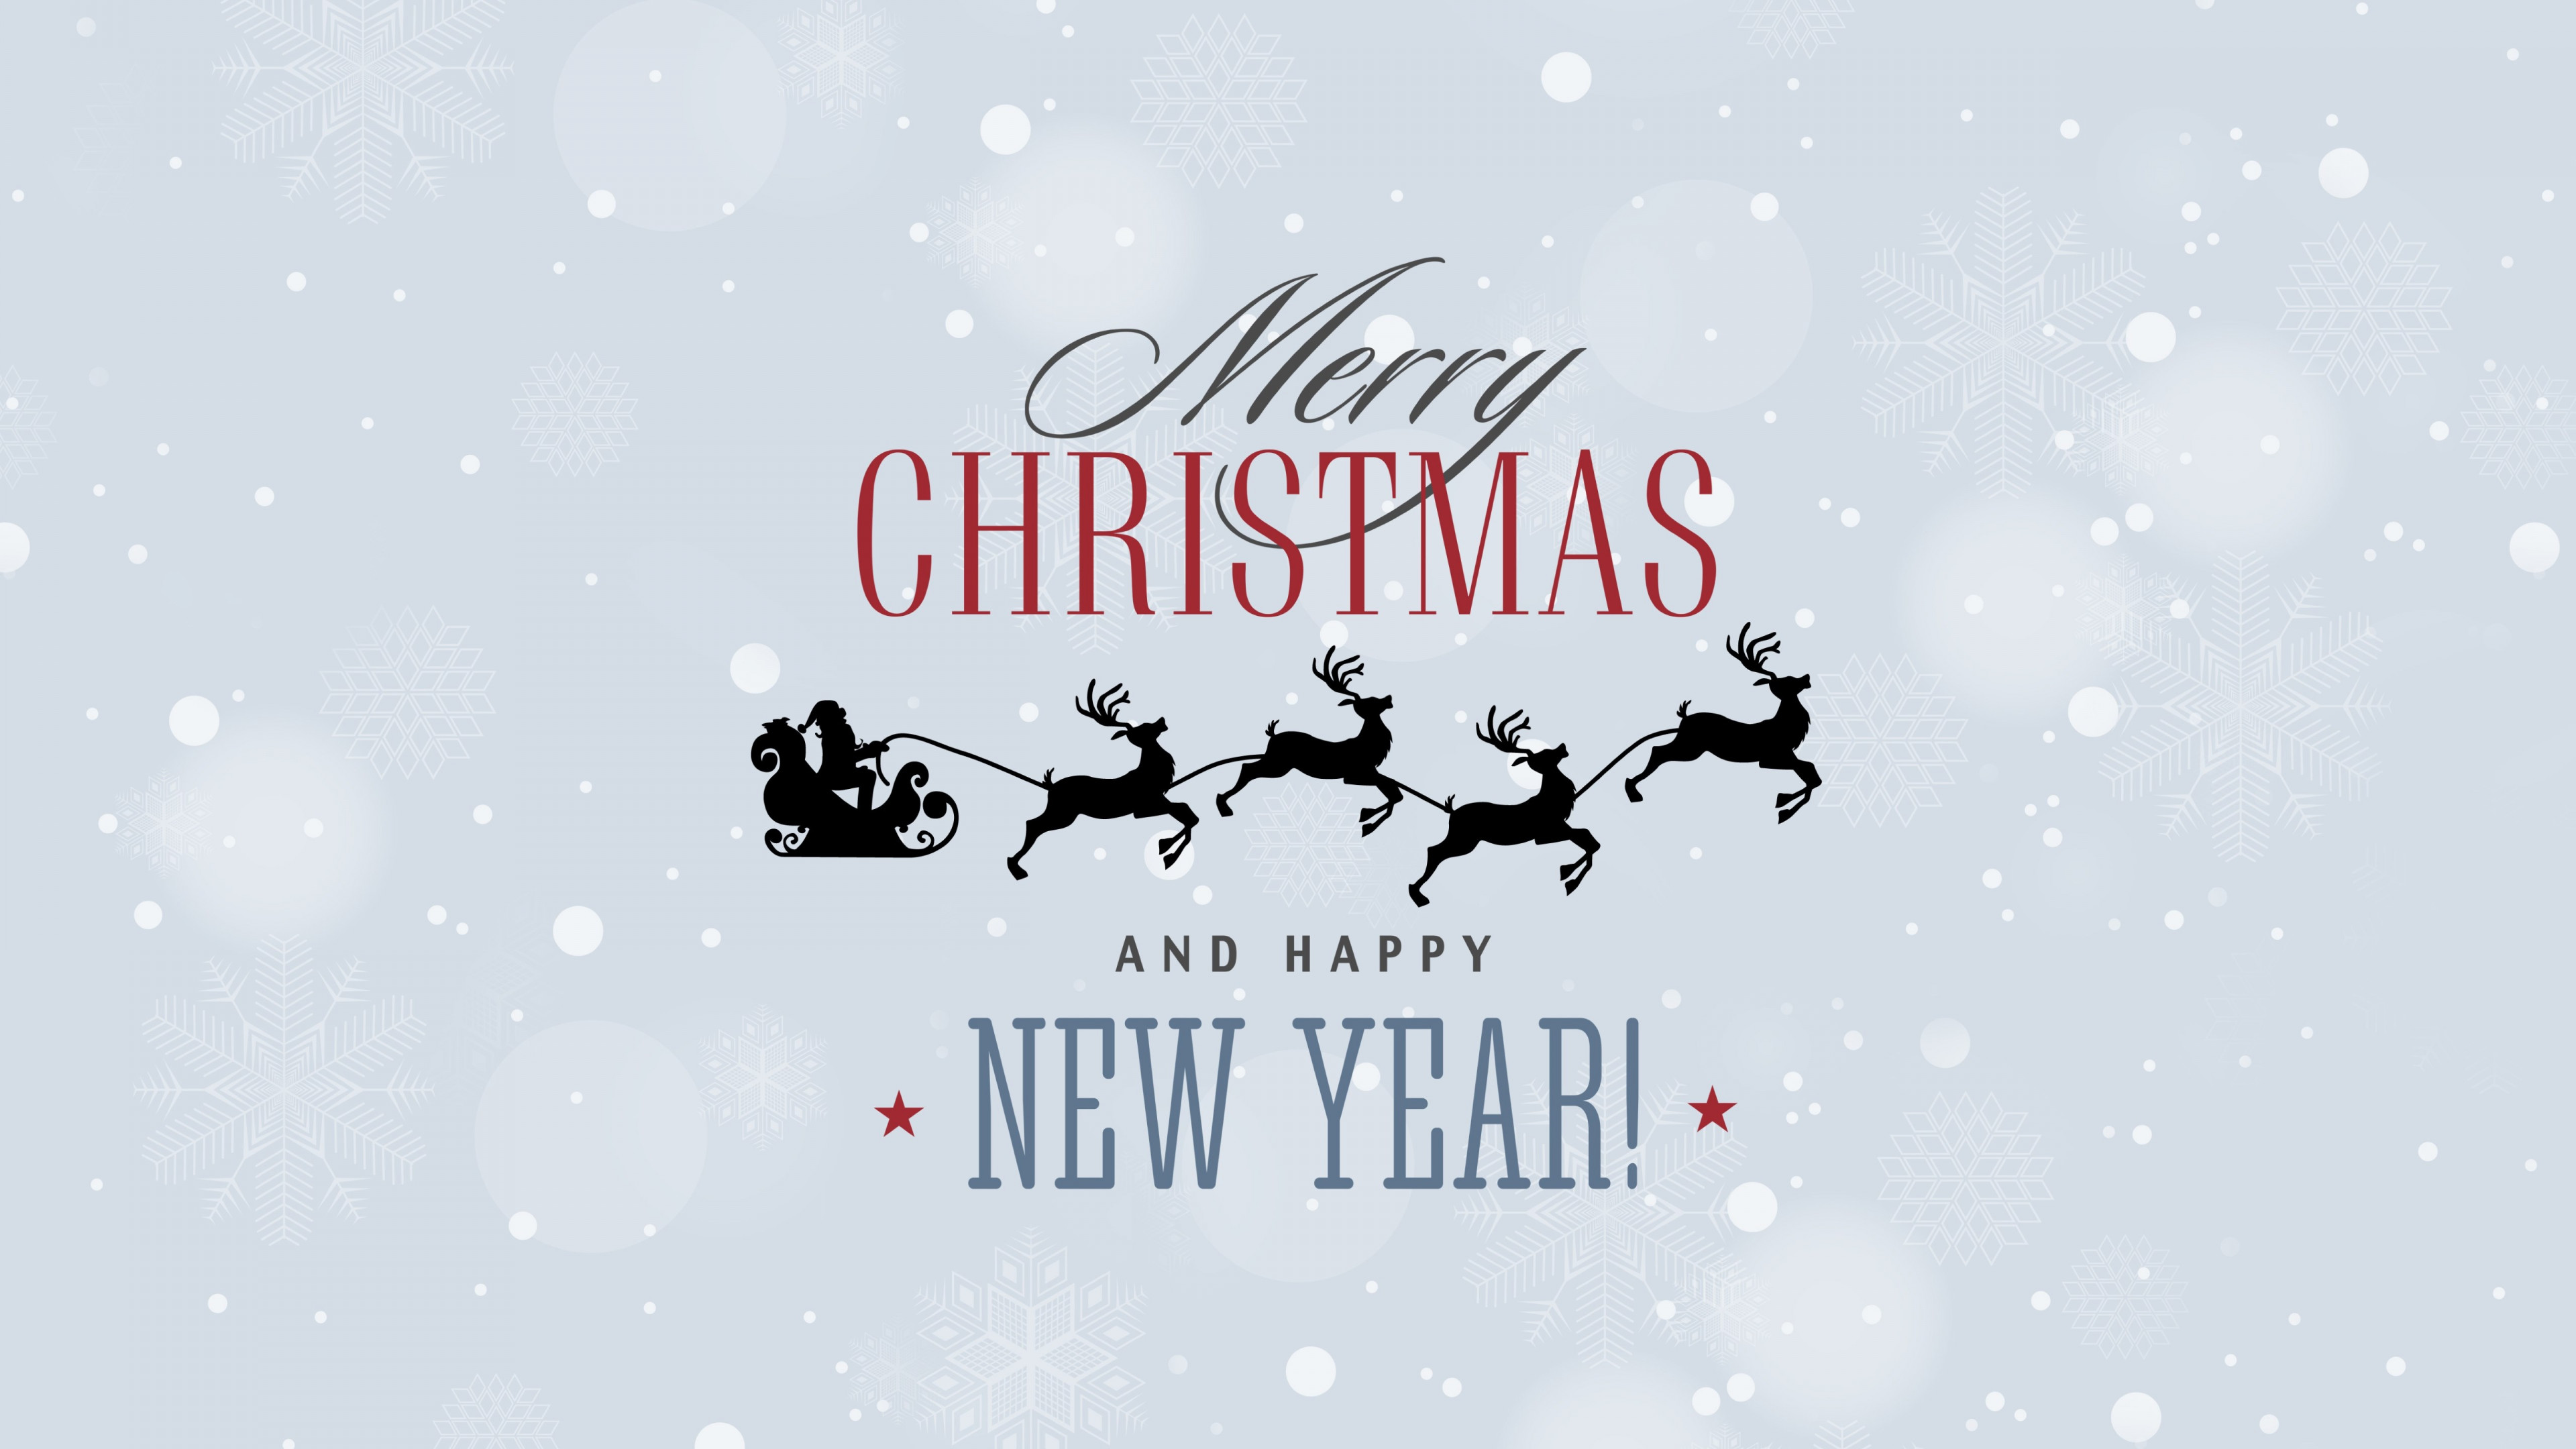 Merry Christmas and a Happy New Year wallpaper 3840x2160